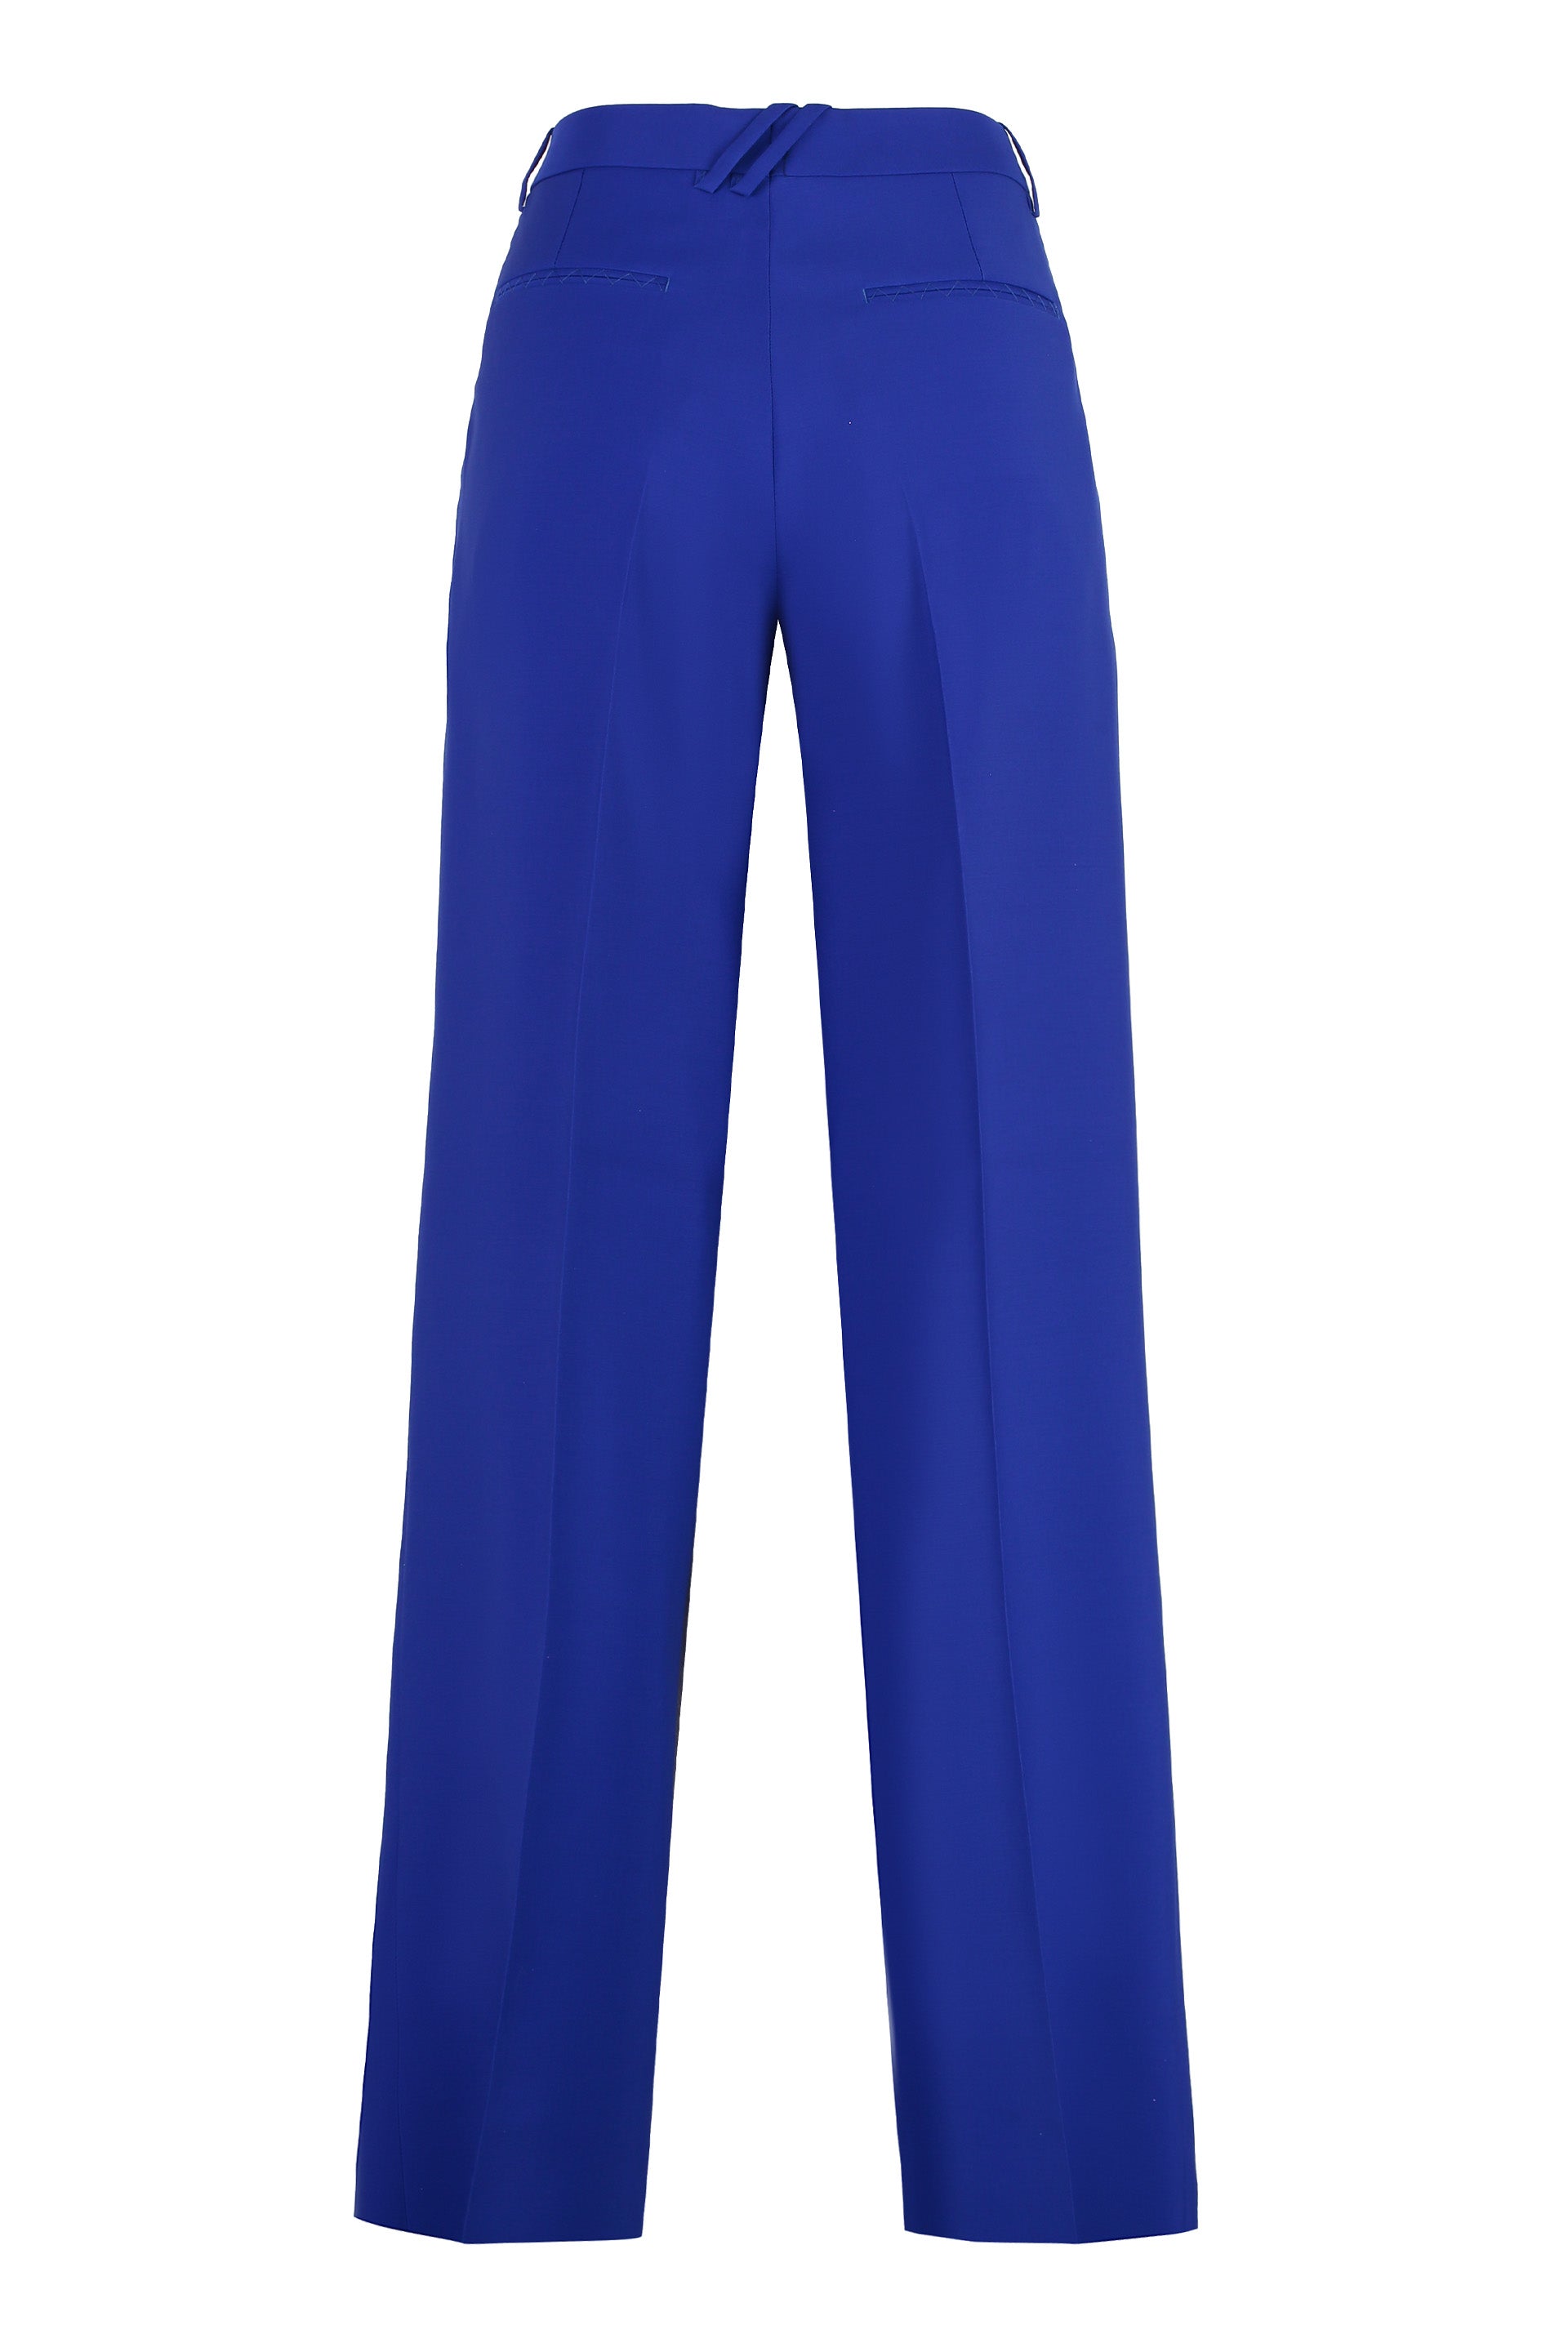 Shop Burberry Blue Virgin Wool Tailored Trousers For Women